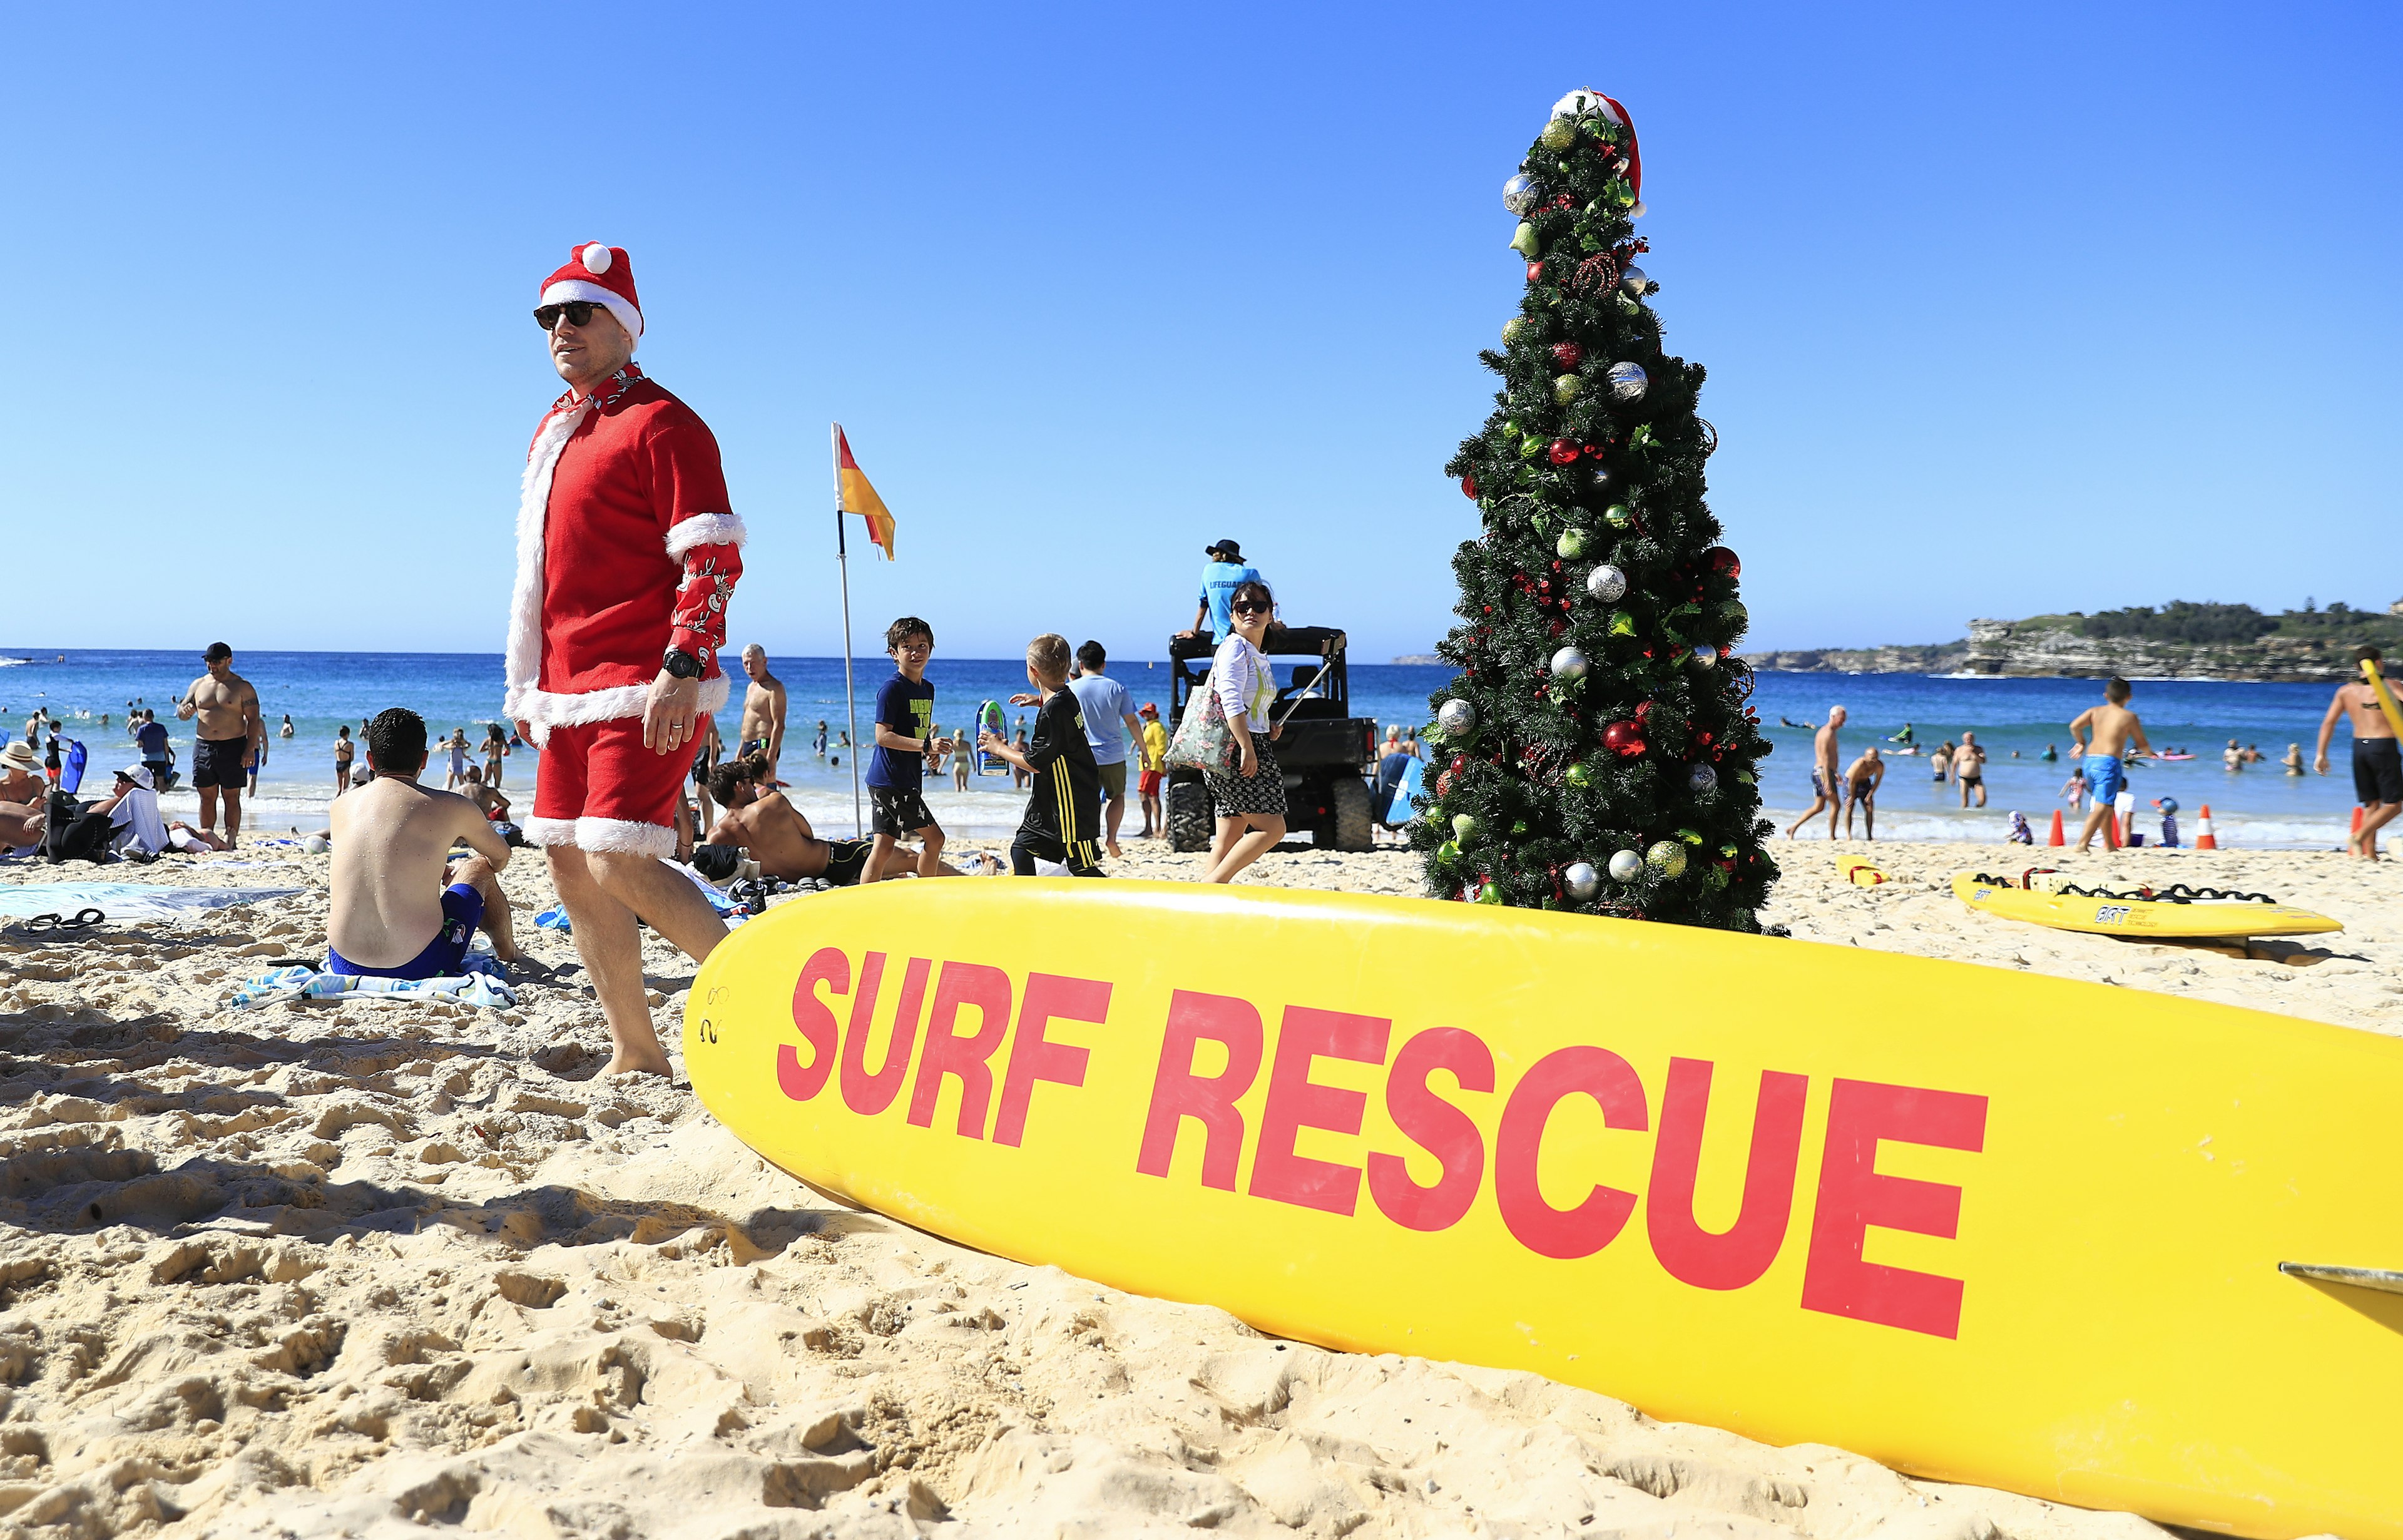 SYDNEY, AUSTRALIA - DECEMBER 25: A man dressed  as Santa poses next to a Christmas tree on Bondi Beach on December 25, 2018 in Sydney, Australia. December is one of the hottest months of the year across Australia, with Christmas Day traditionally involving a trip to the beach and celebrations outdoors. (Photo by Mark Evans/Getty Images)